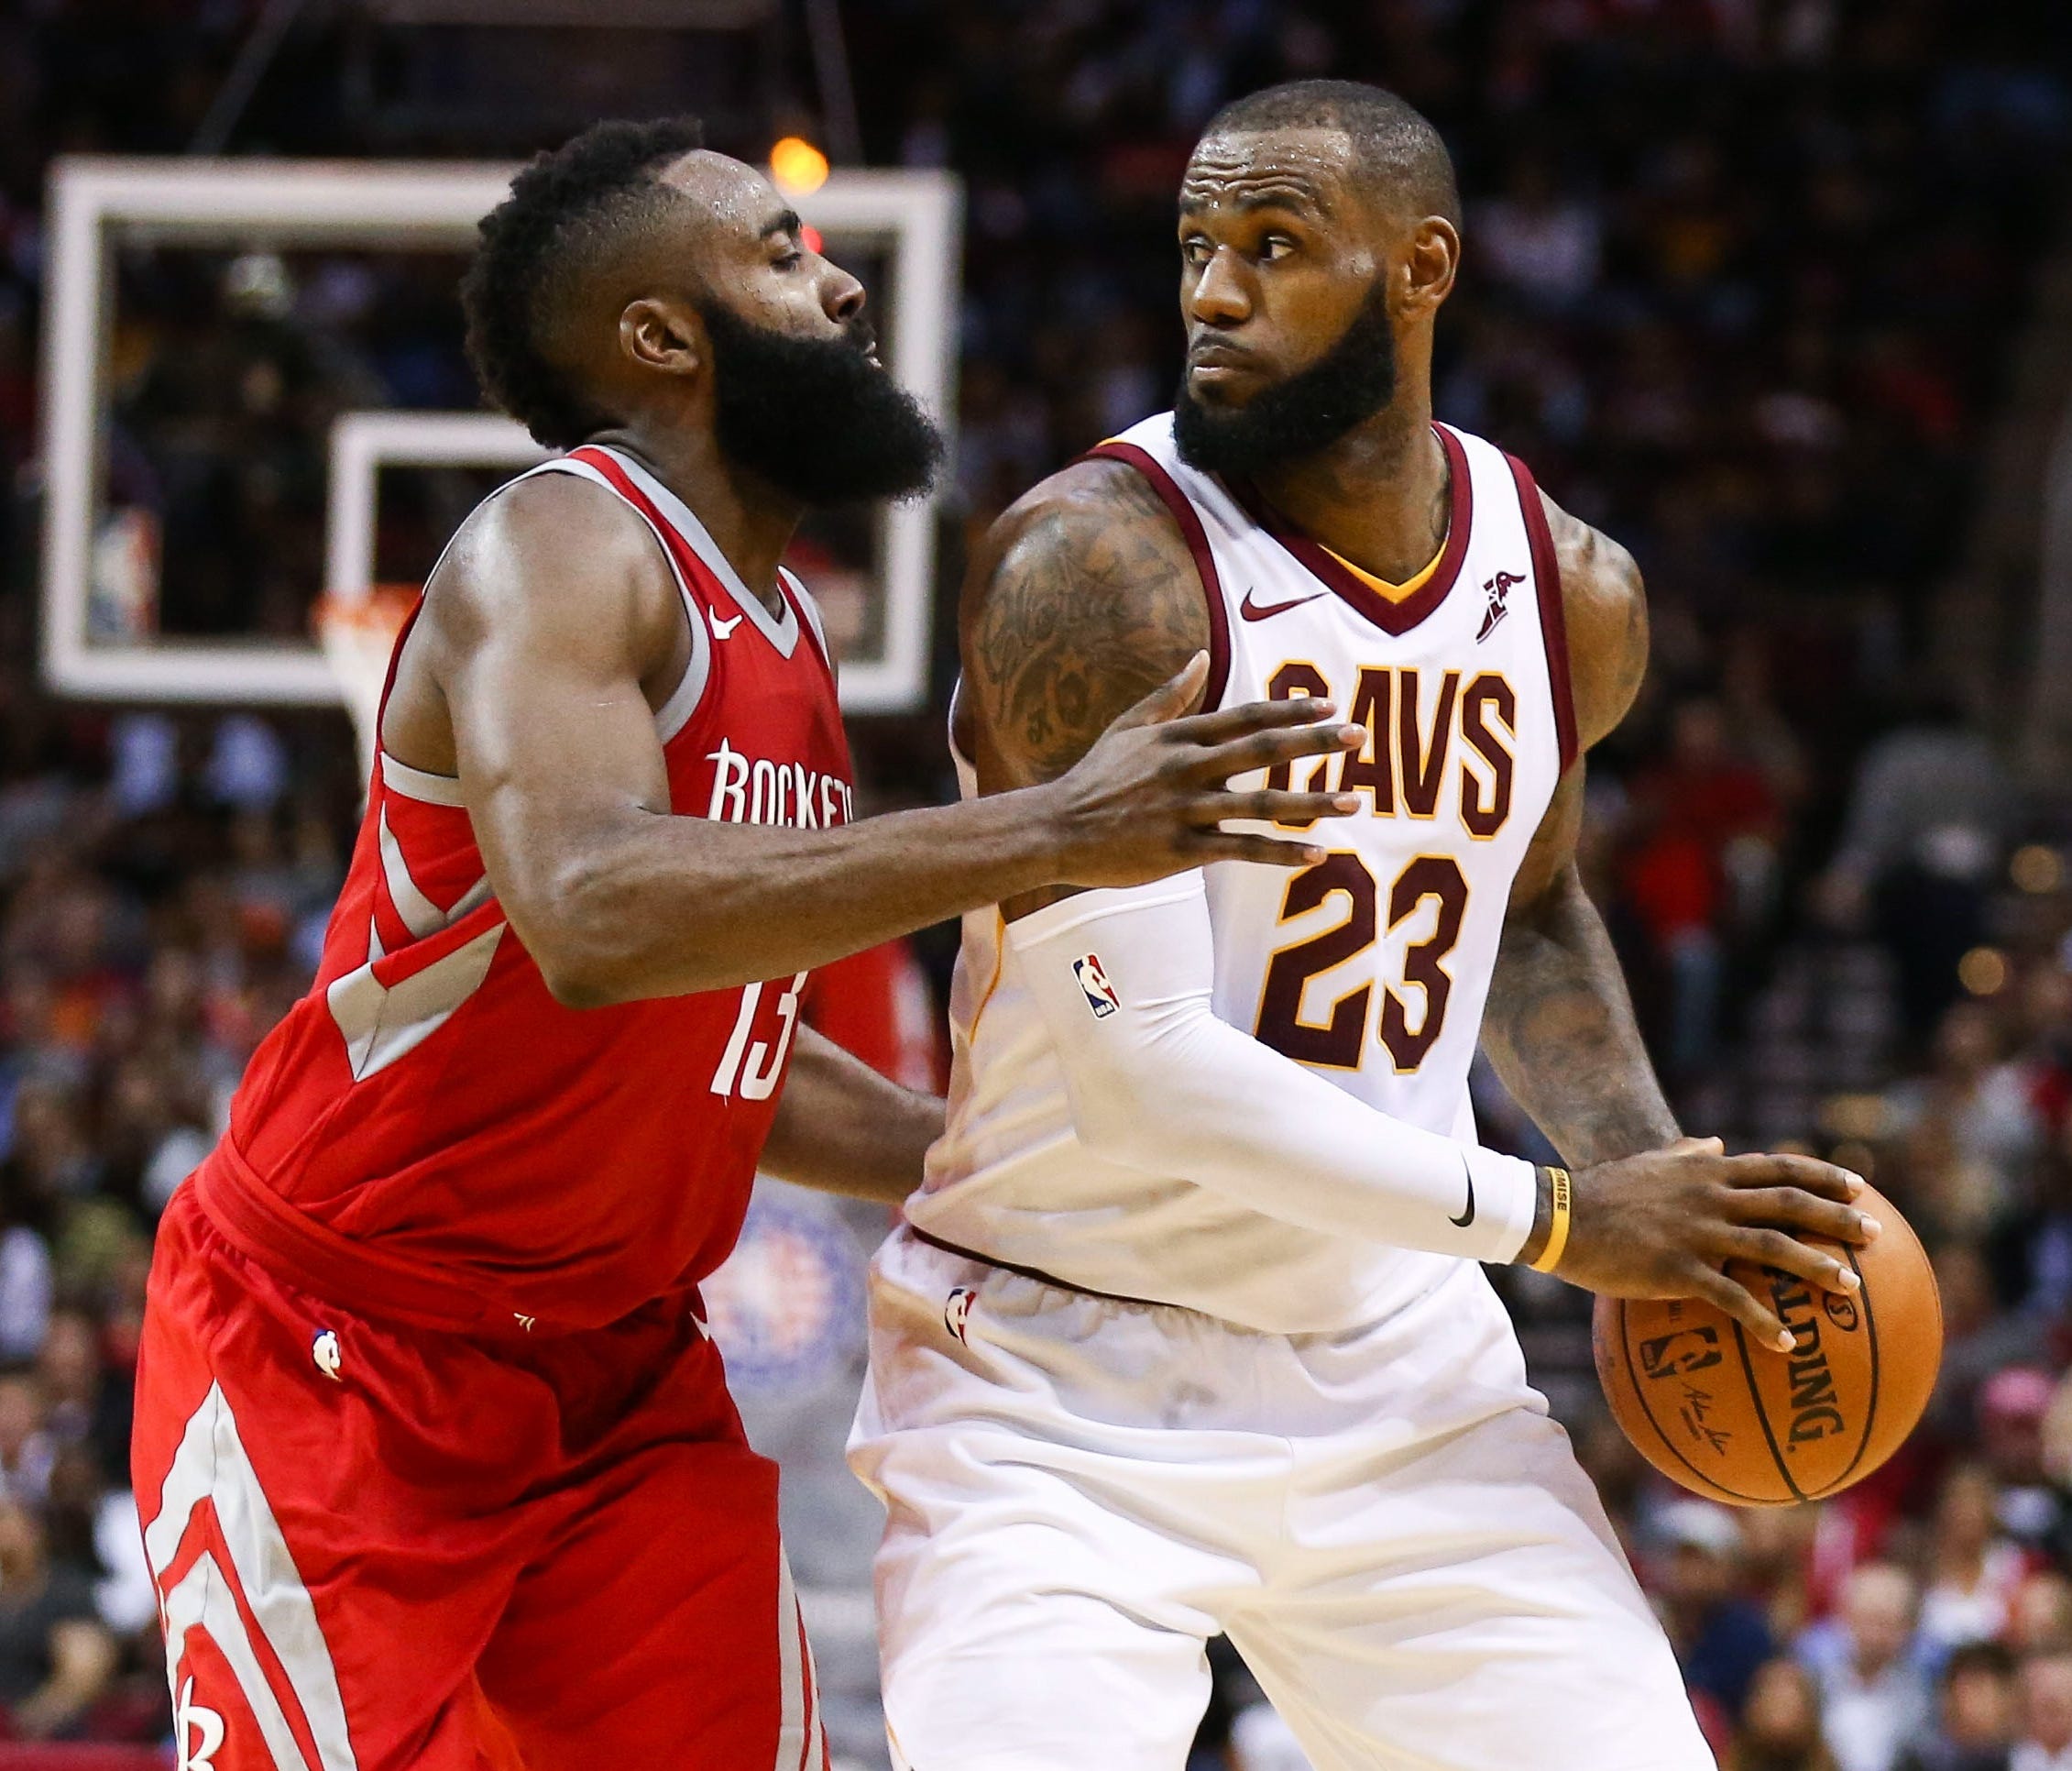 LeBron James is a four-time MVP, while James Harden is the favorite to win his first.